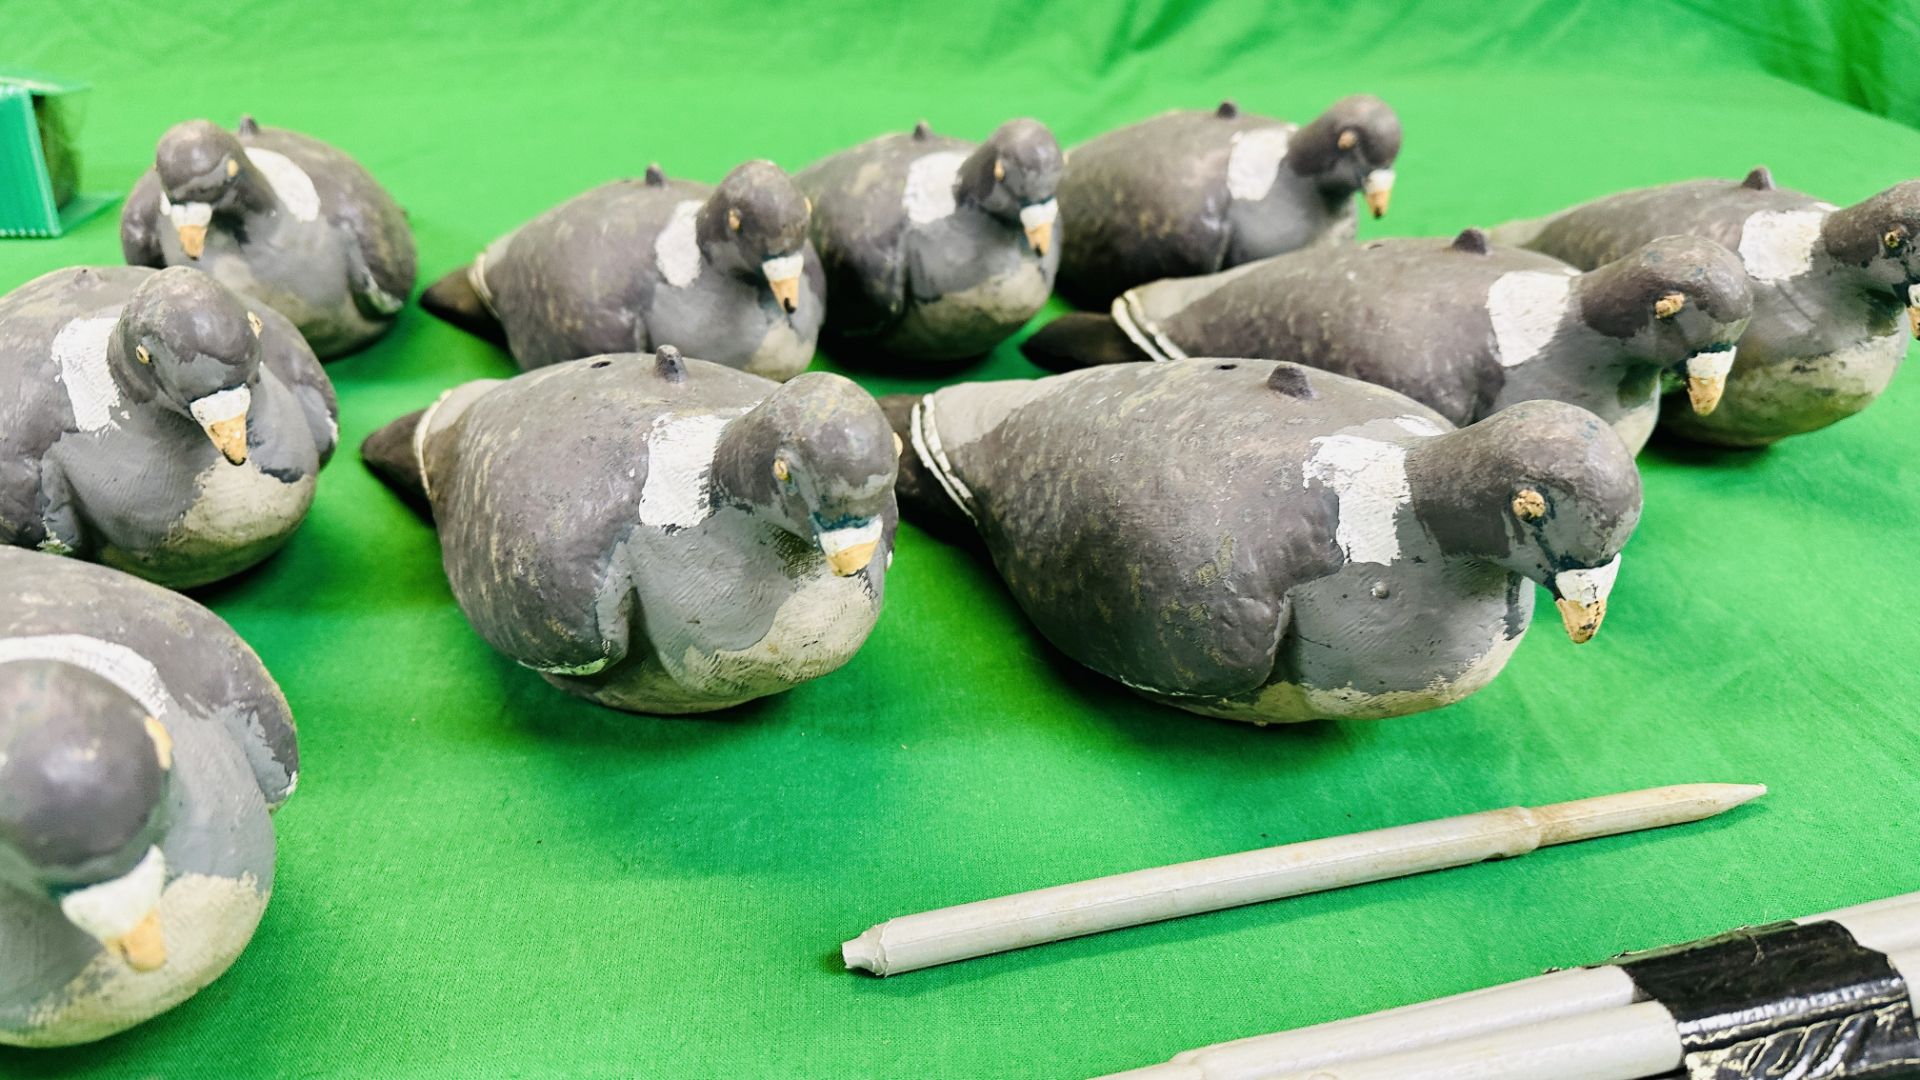 A CAMOUFLAGE HOLD-ALL CONTAINING 10 FLEXI COY PIGEON DECOYS WITH GROUND STAKES. - Image 3 of 8